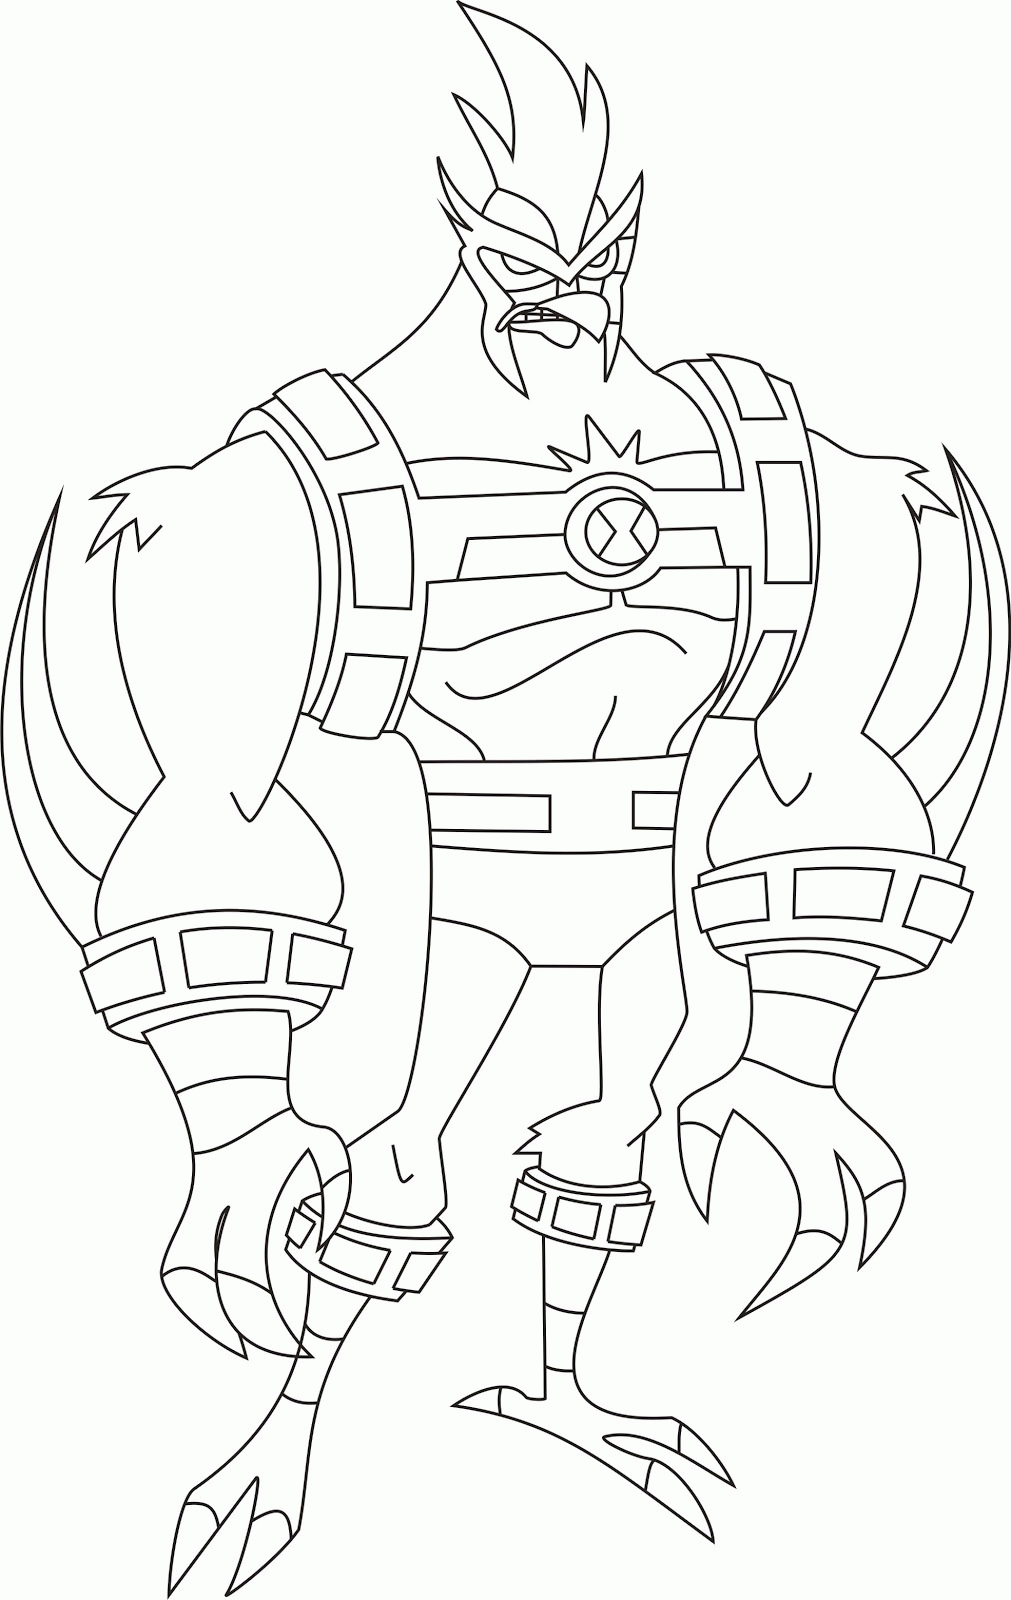 Ben 10 Omniverse Coloring Pages - Coloring Home.